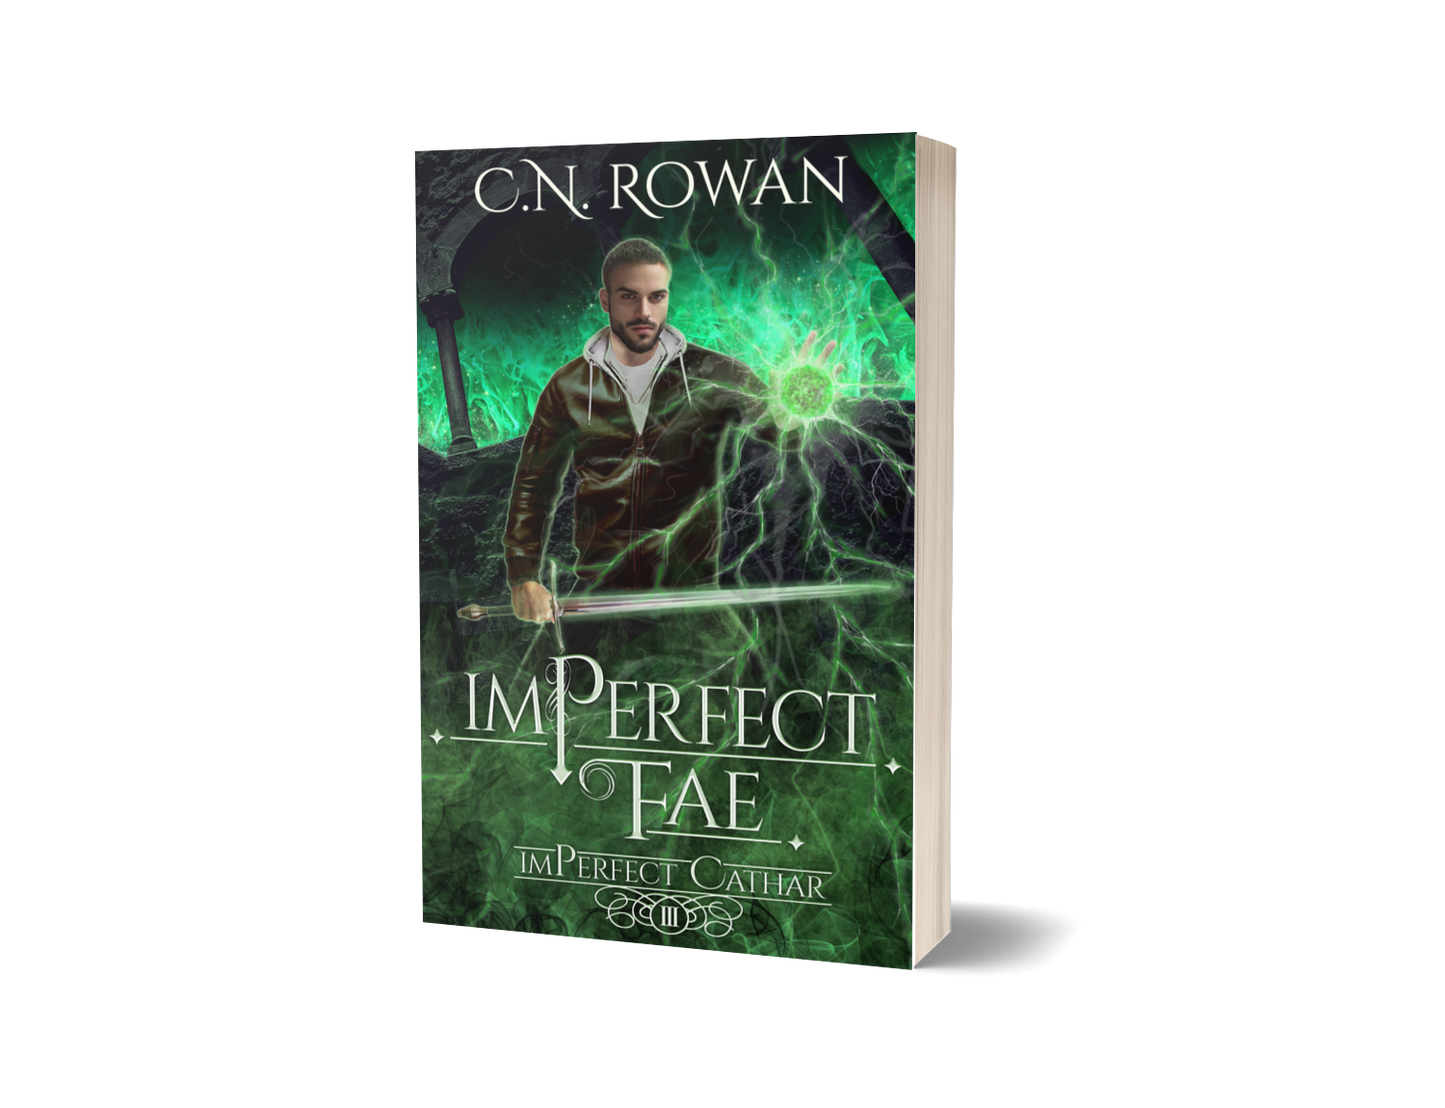 imPerfect Fae Signed Paperback